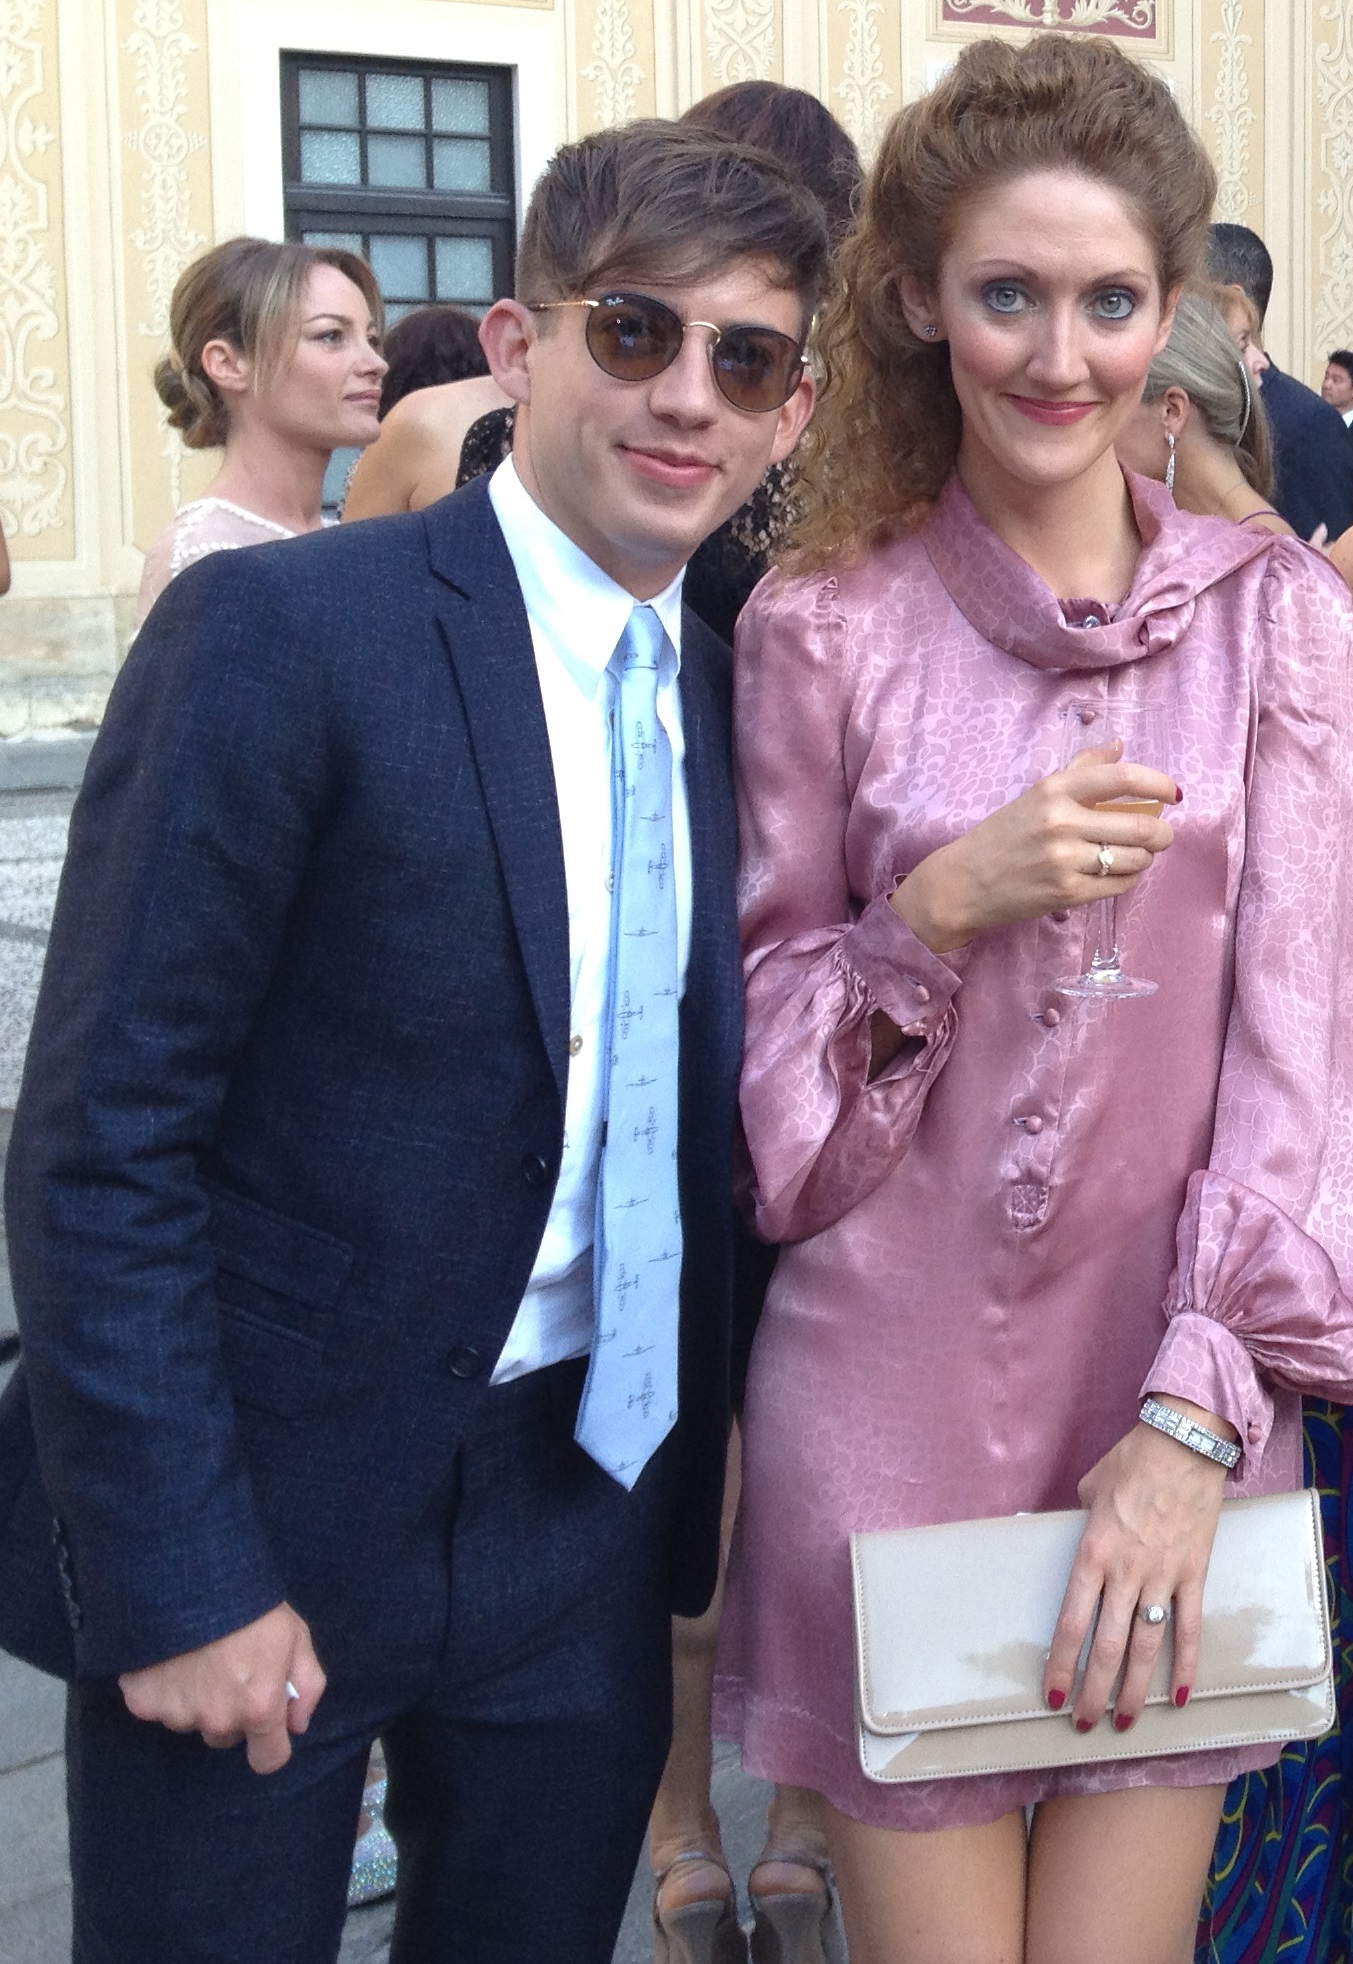 Actress Charlotte Milchard and actor Kevin McHale at an event at the Palace during the 53rd Monte Carlo TV Festival in Monaco.